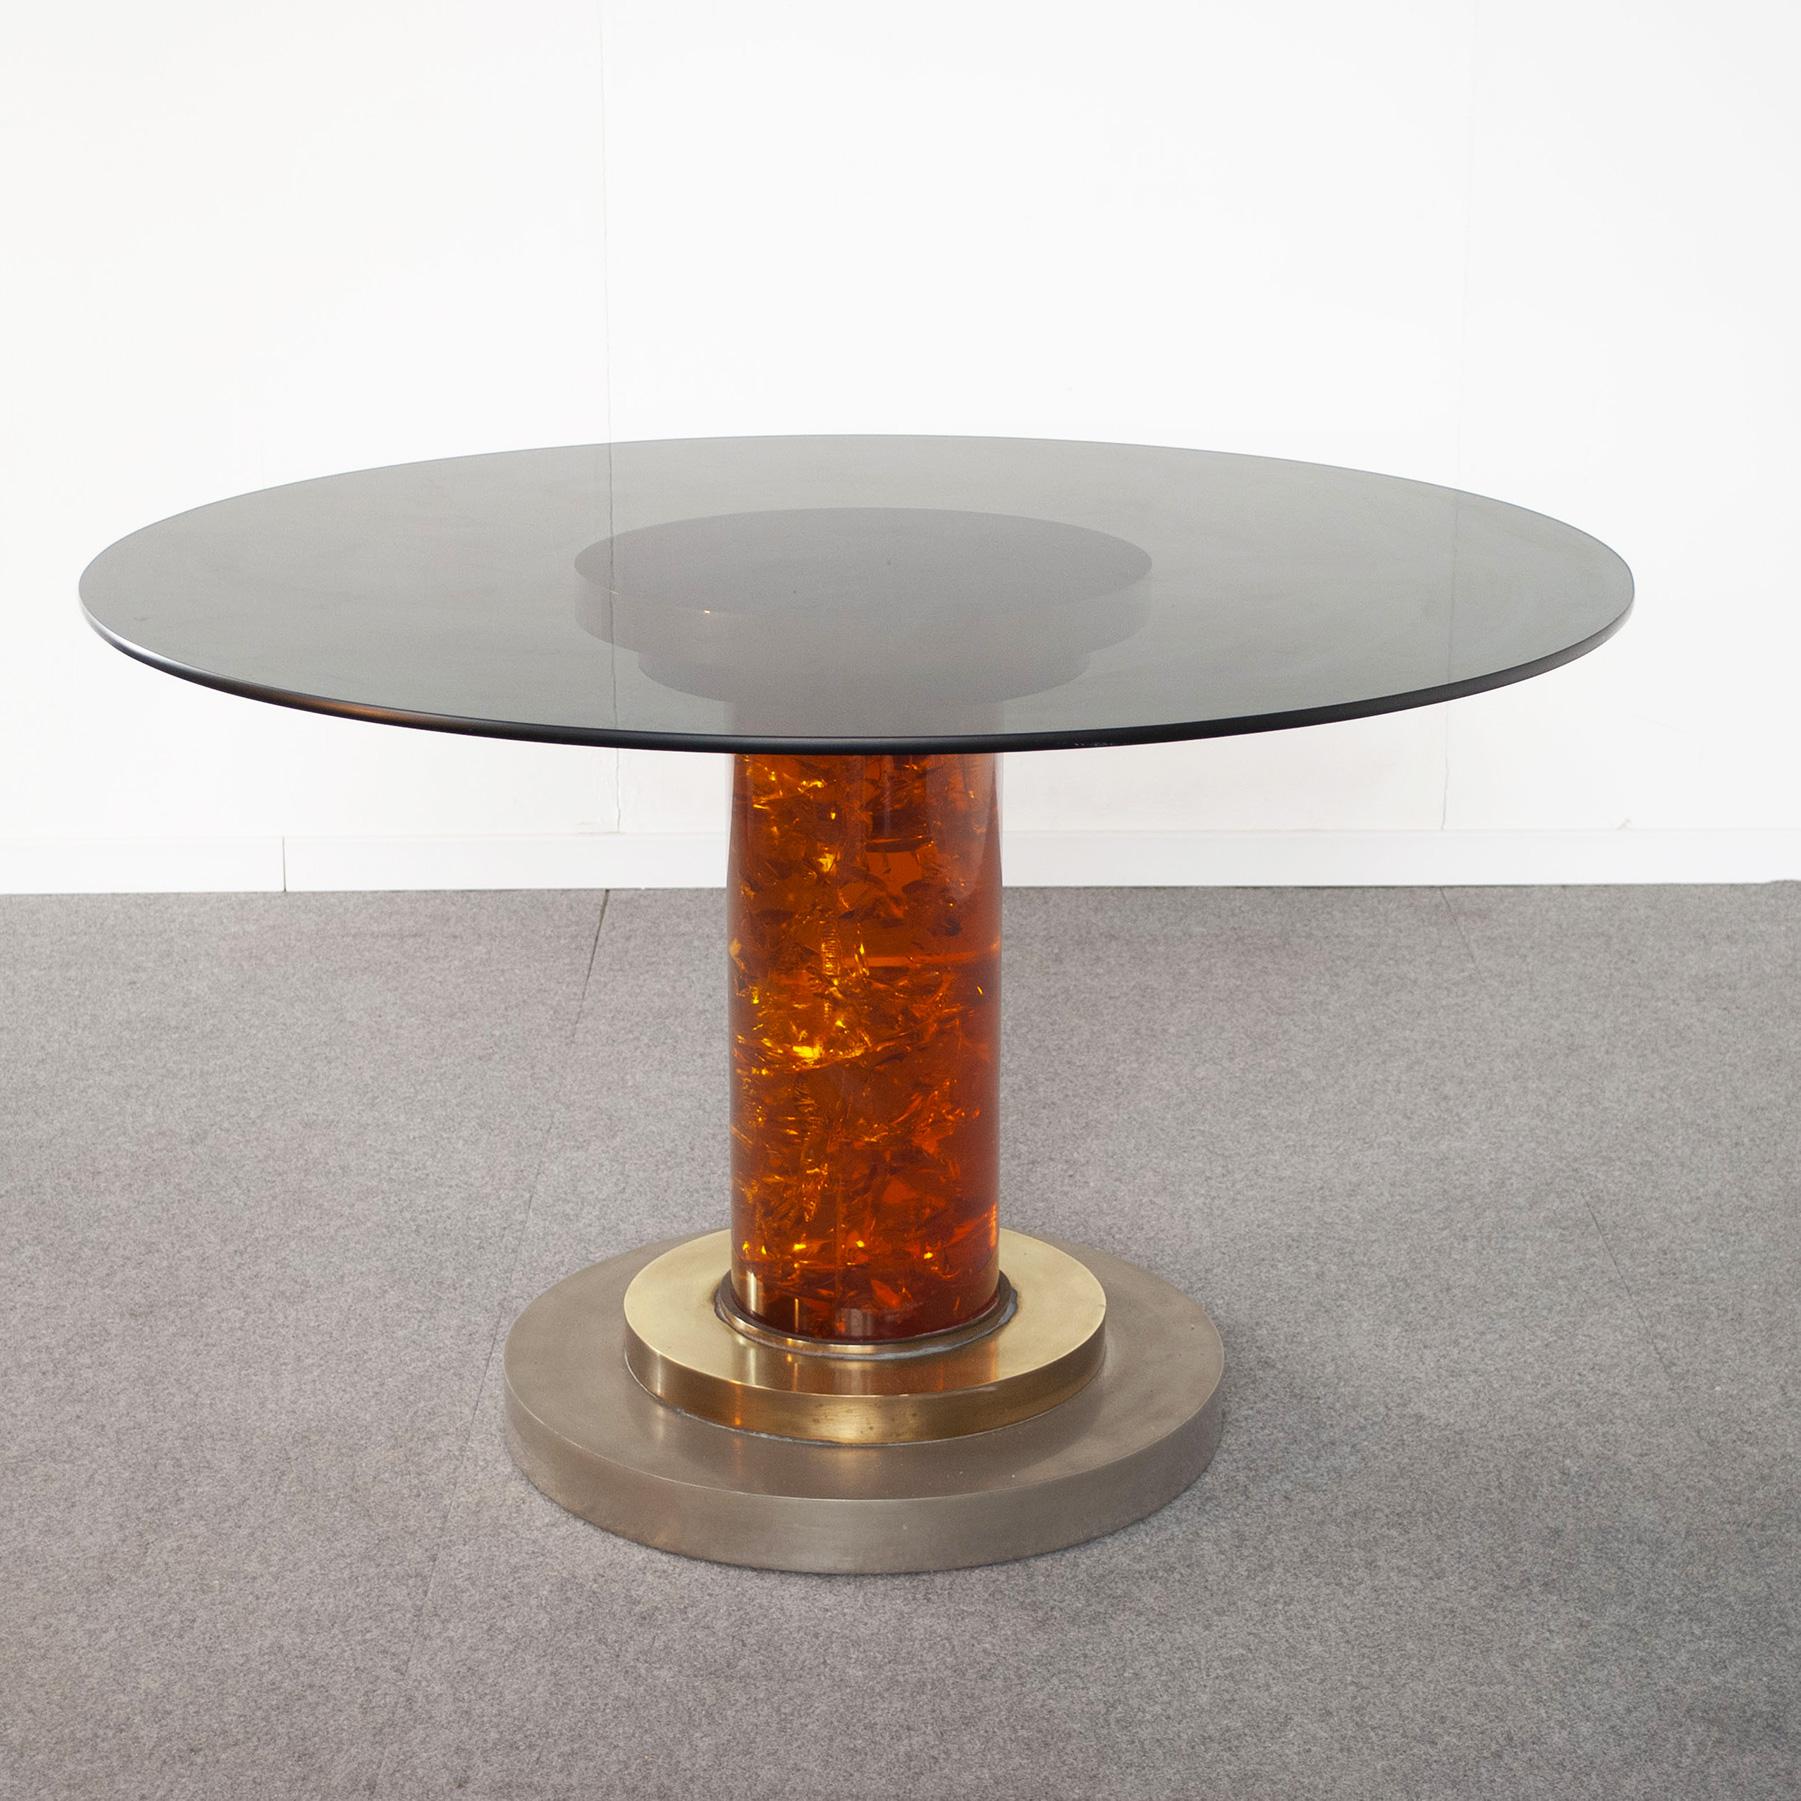 70's table composed of an elegant mix of metals with polished brass and steel finish. The central base is made of full honey-colored plexiglass with a diameter of 20 cm. The smoked glass top in the image is 15 mm thick and can also be modified with